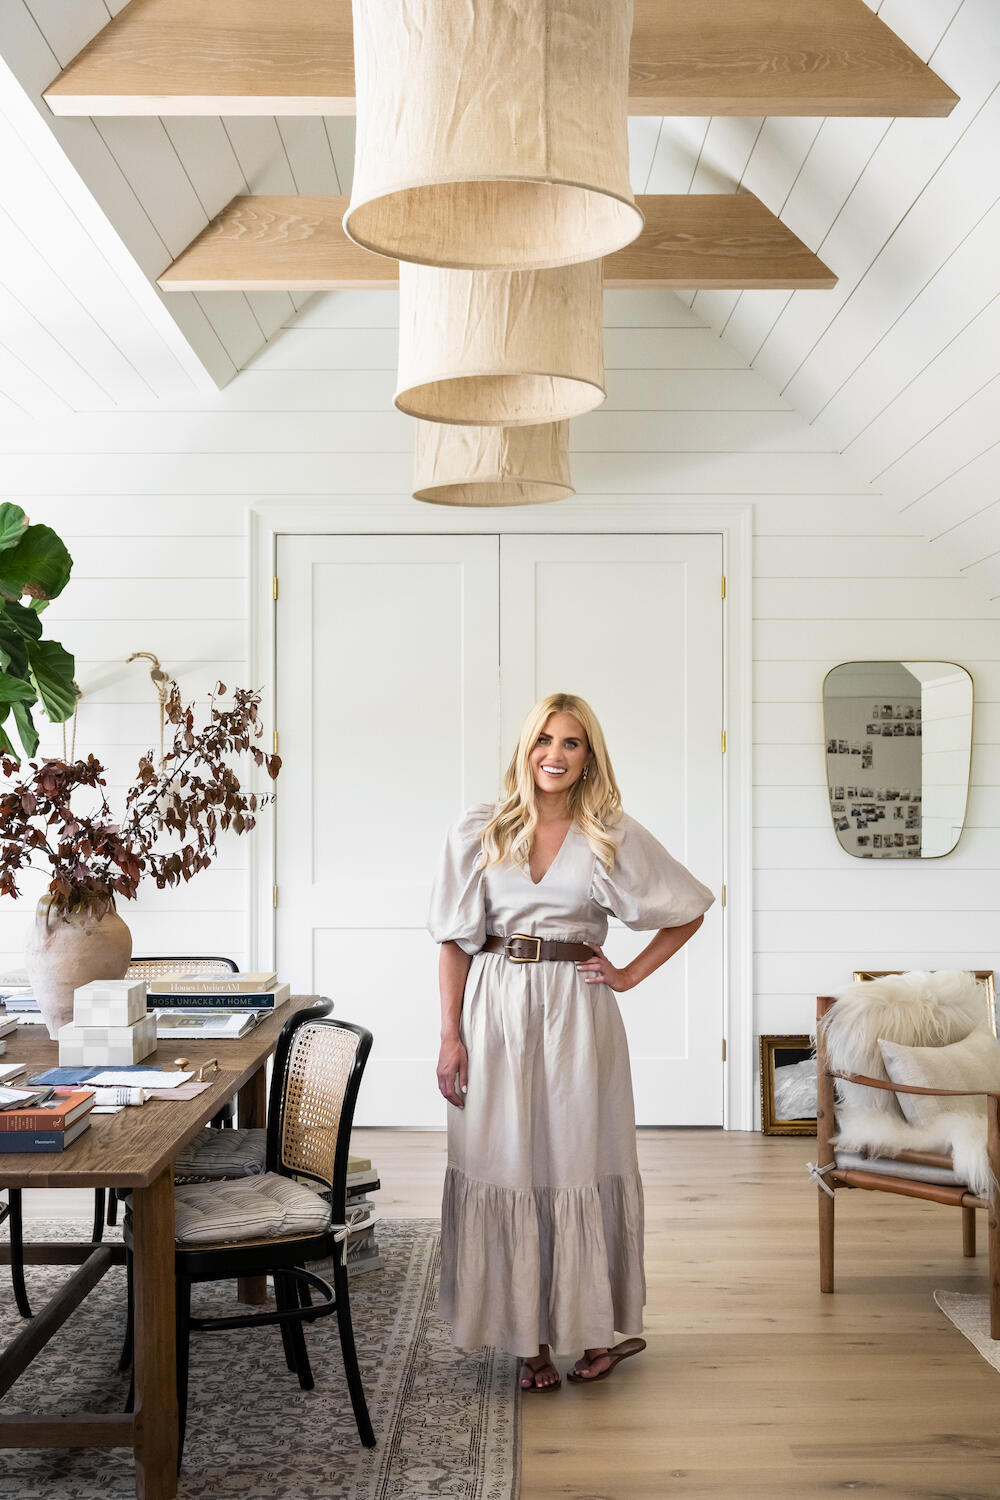 Shea McGee designs her dream room in linens, velvets, leather and stone